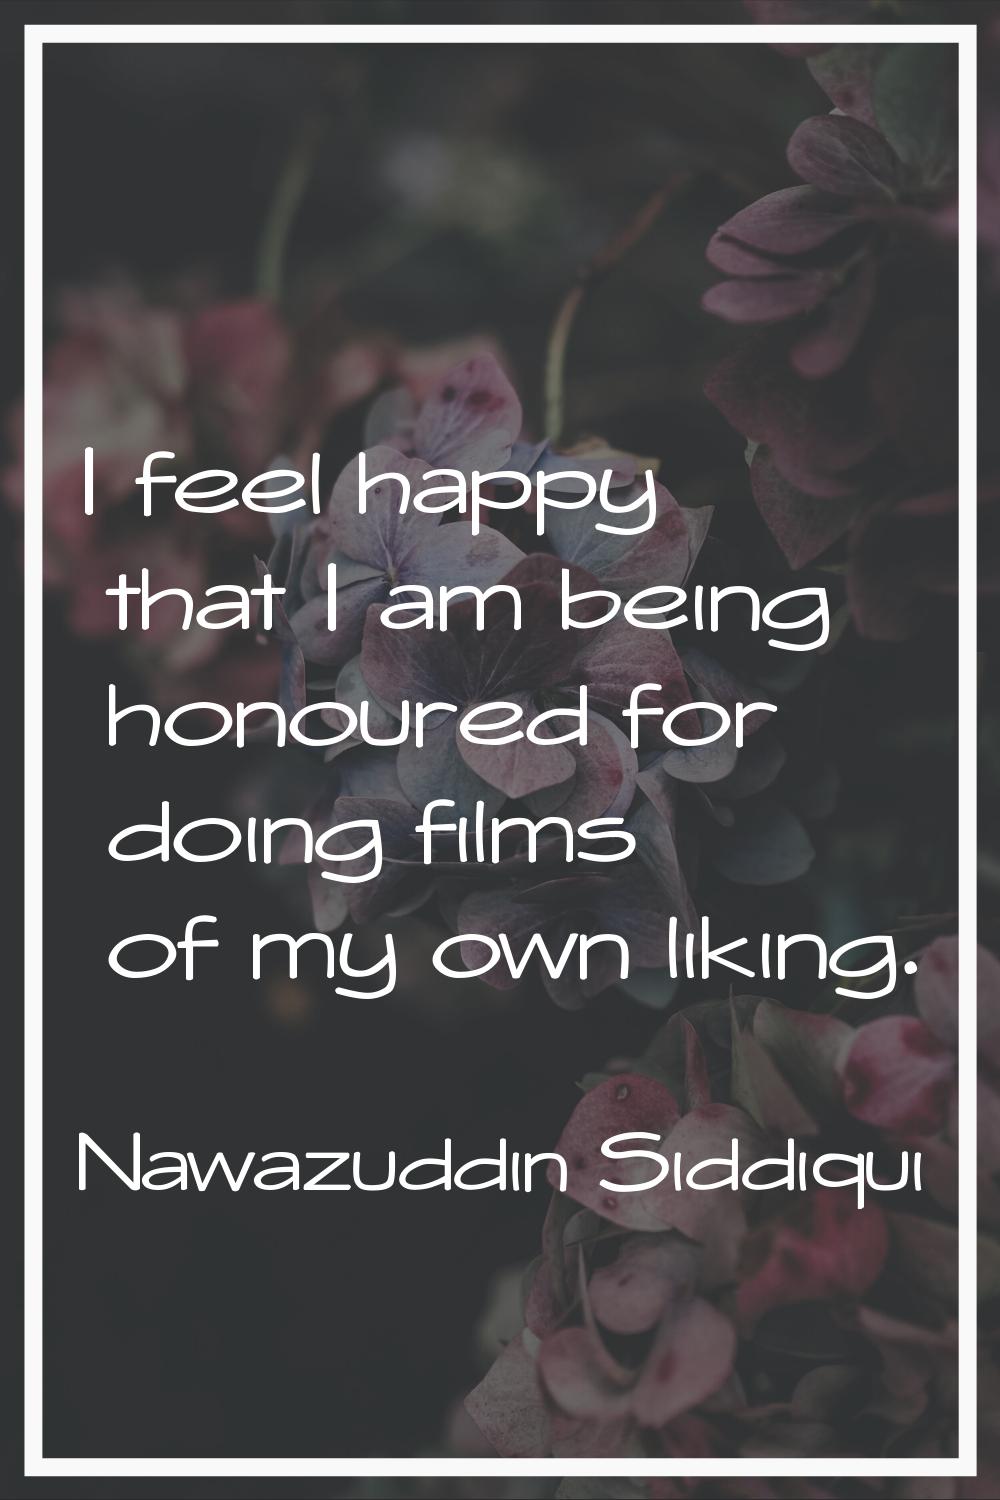 I feel happy that I am being honoured for doing films of my own liking.